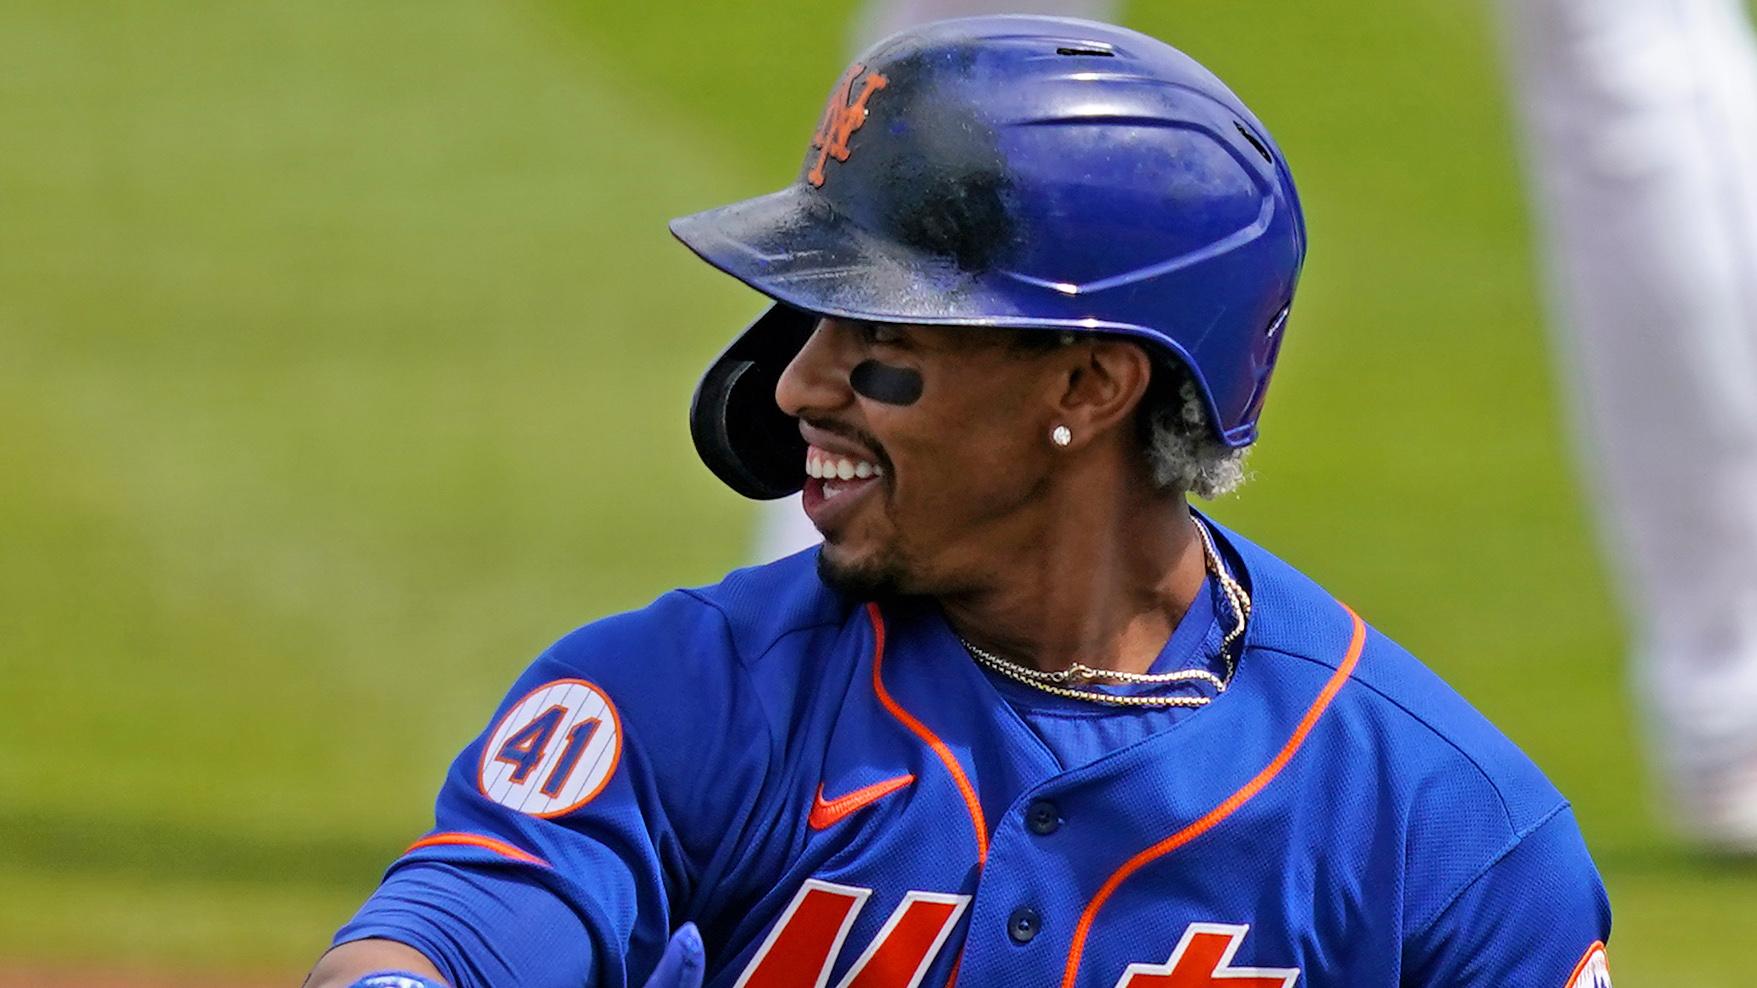 Mar 8, 2021; West Palm Beach, Florida, USA; New York Mets shortstop Francisco Lindor (12) reacts after his fly ball was caught by Washington Nationals center fielder Victor Robles (16, not pictured) in the 1st inning of the spring training game at The Ballpark of the Palm Beaches. / Jasen Vinlove-USA TODAY Sports